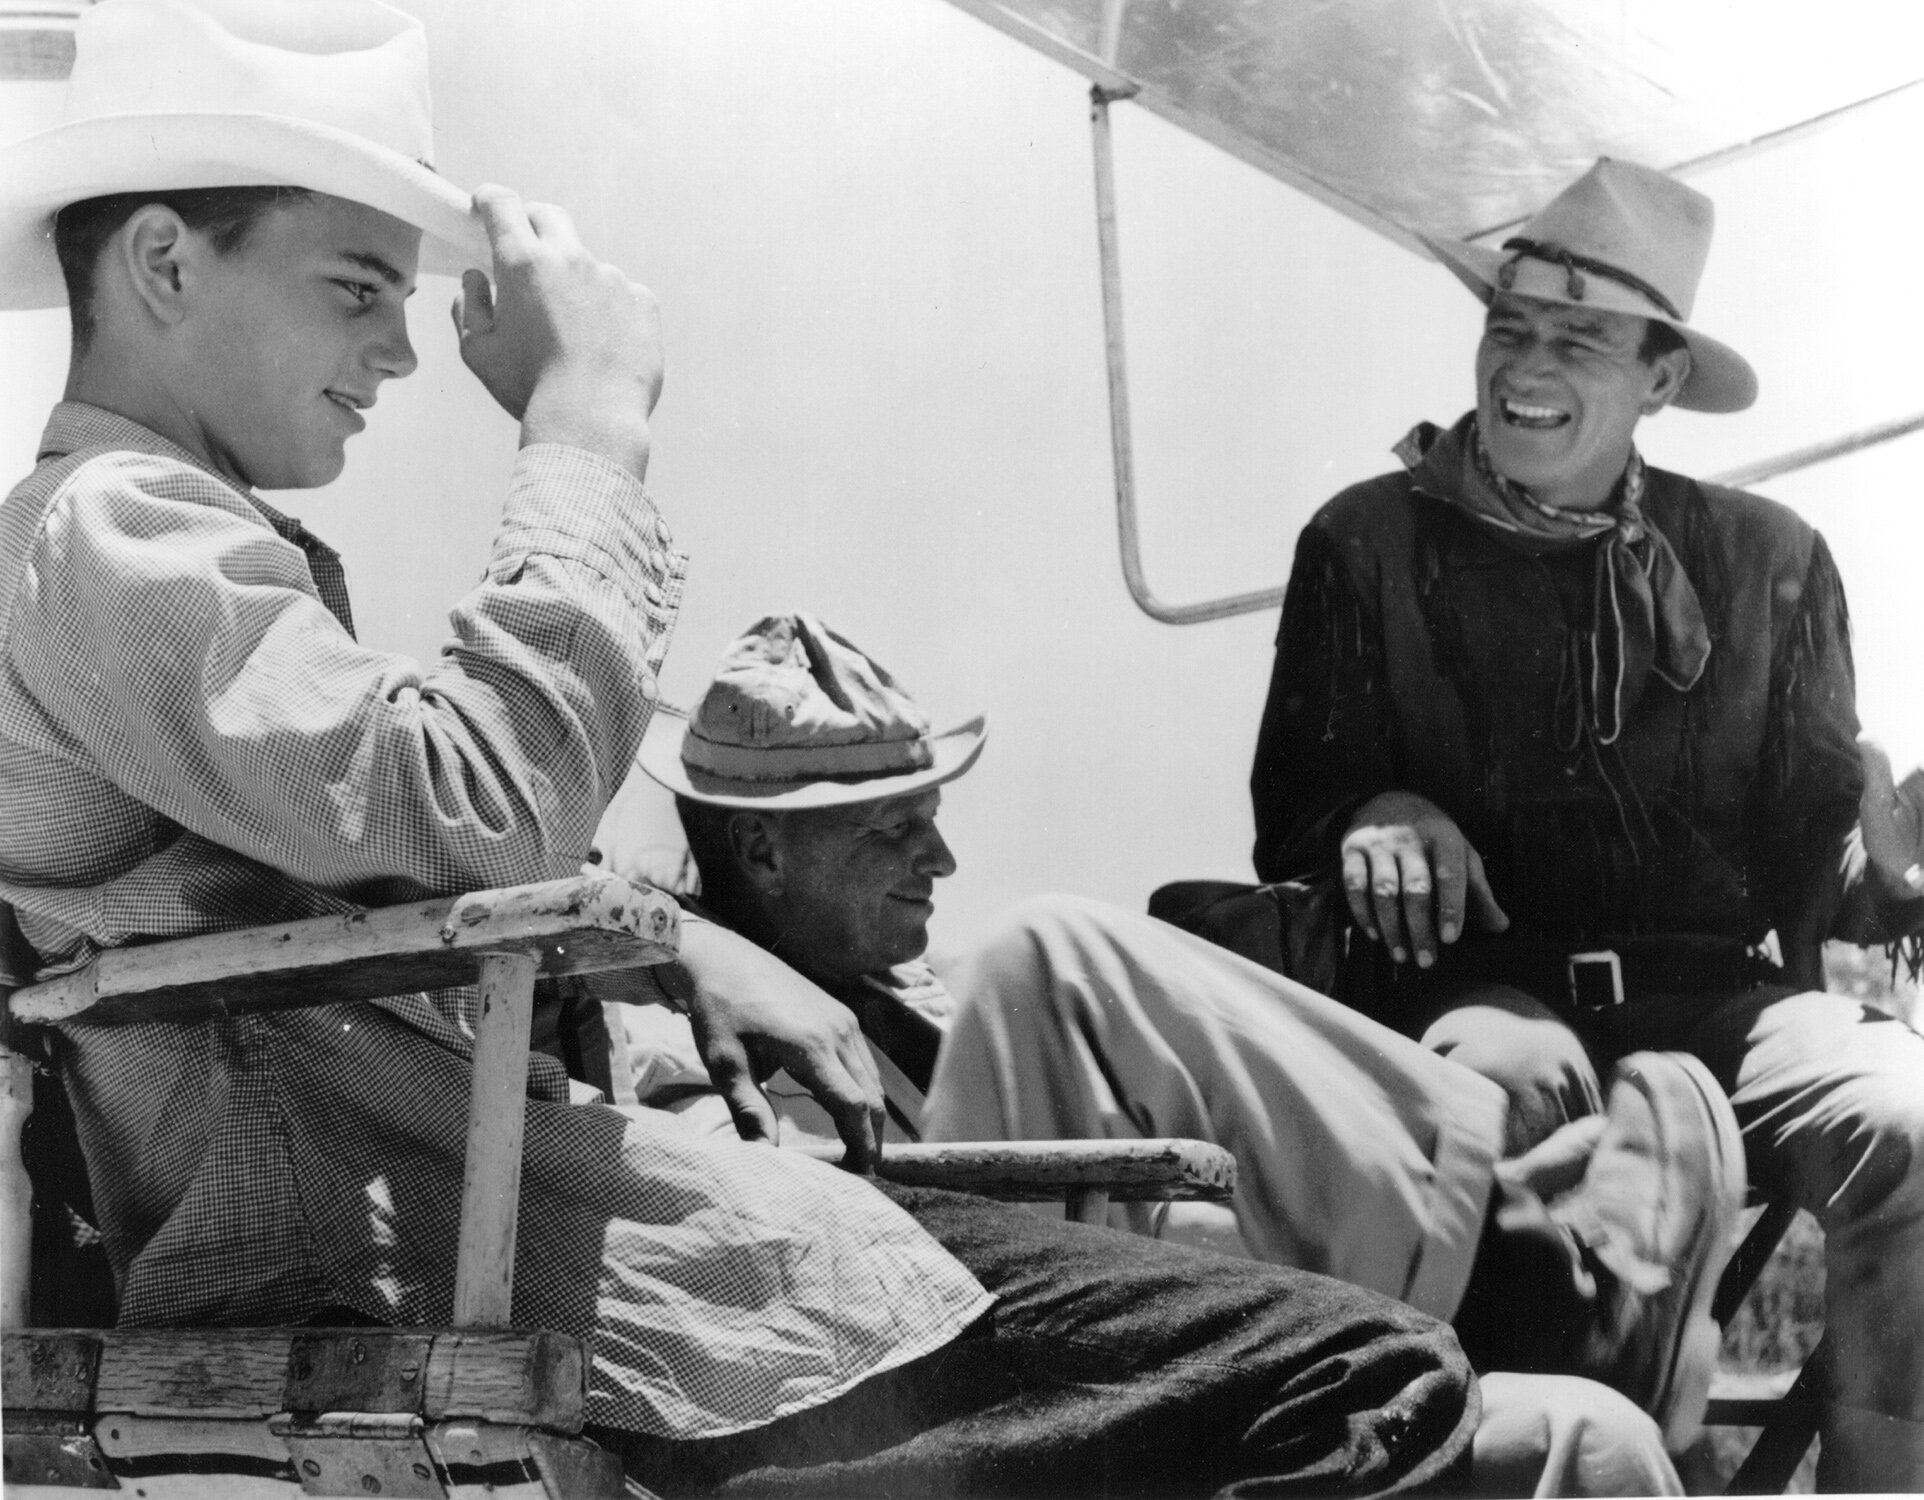 Patrick with his dad on the set of Hondo, circa 1953.